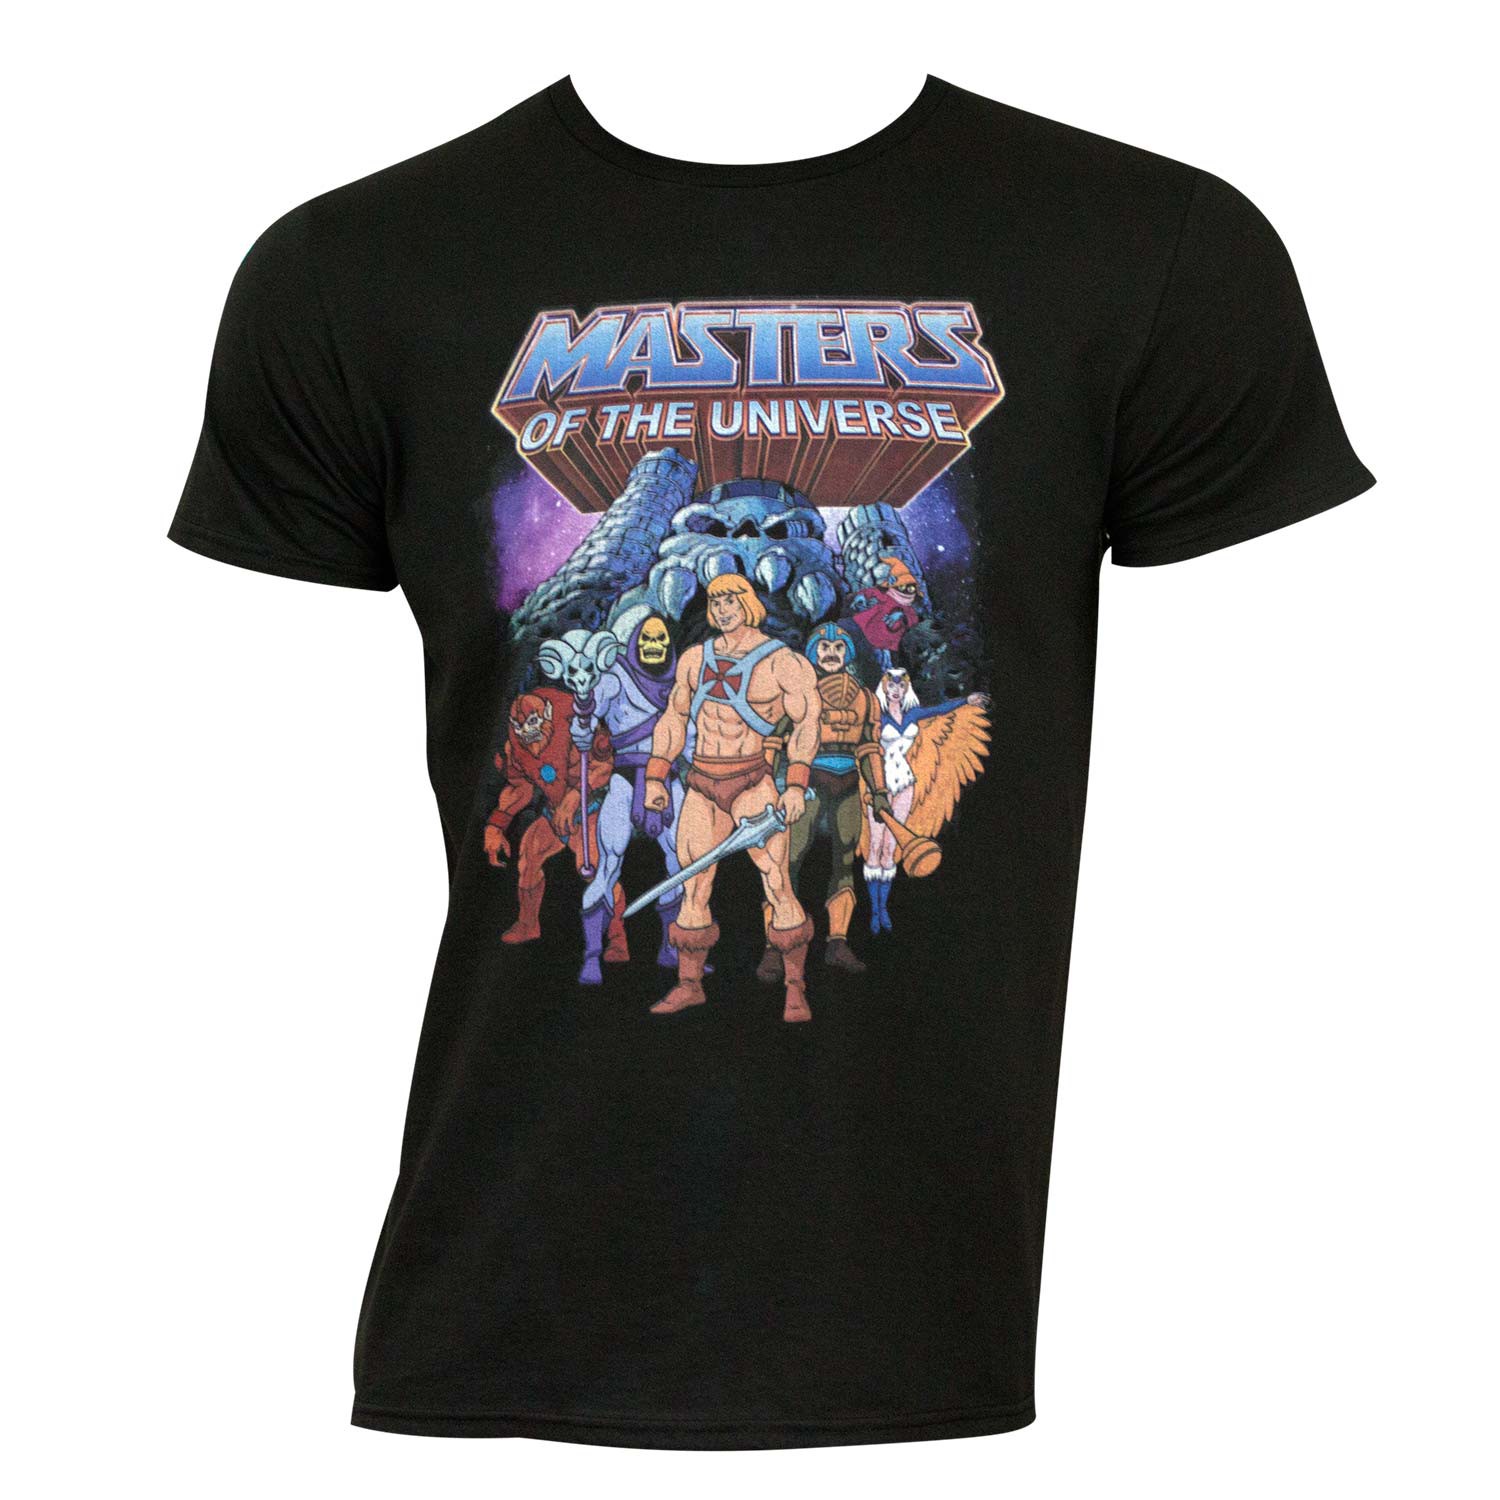 Masters of The Universe Graphic Logo Tee Shirt